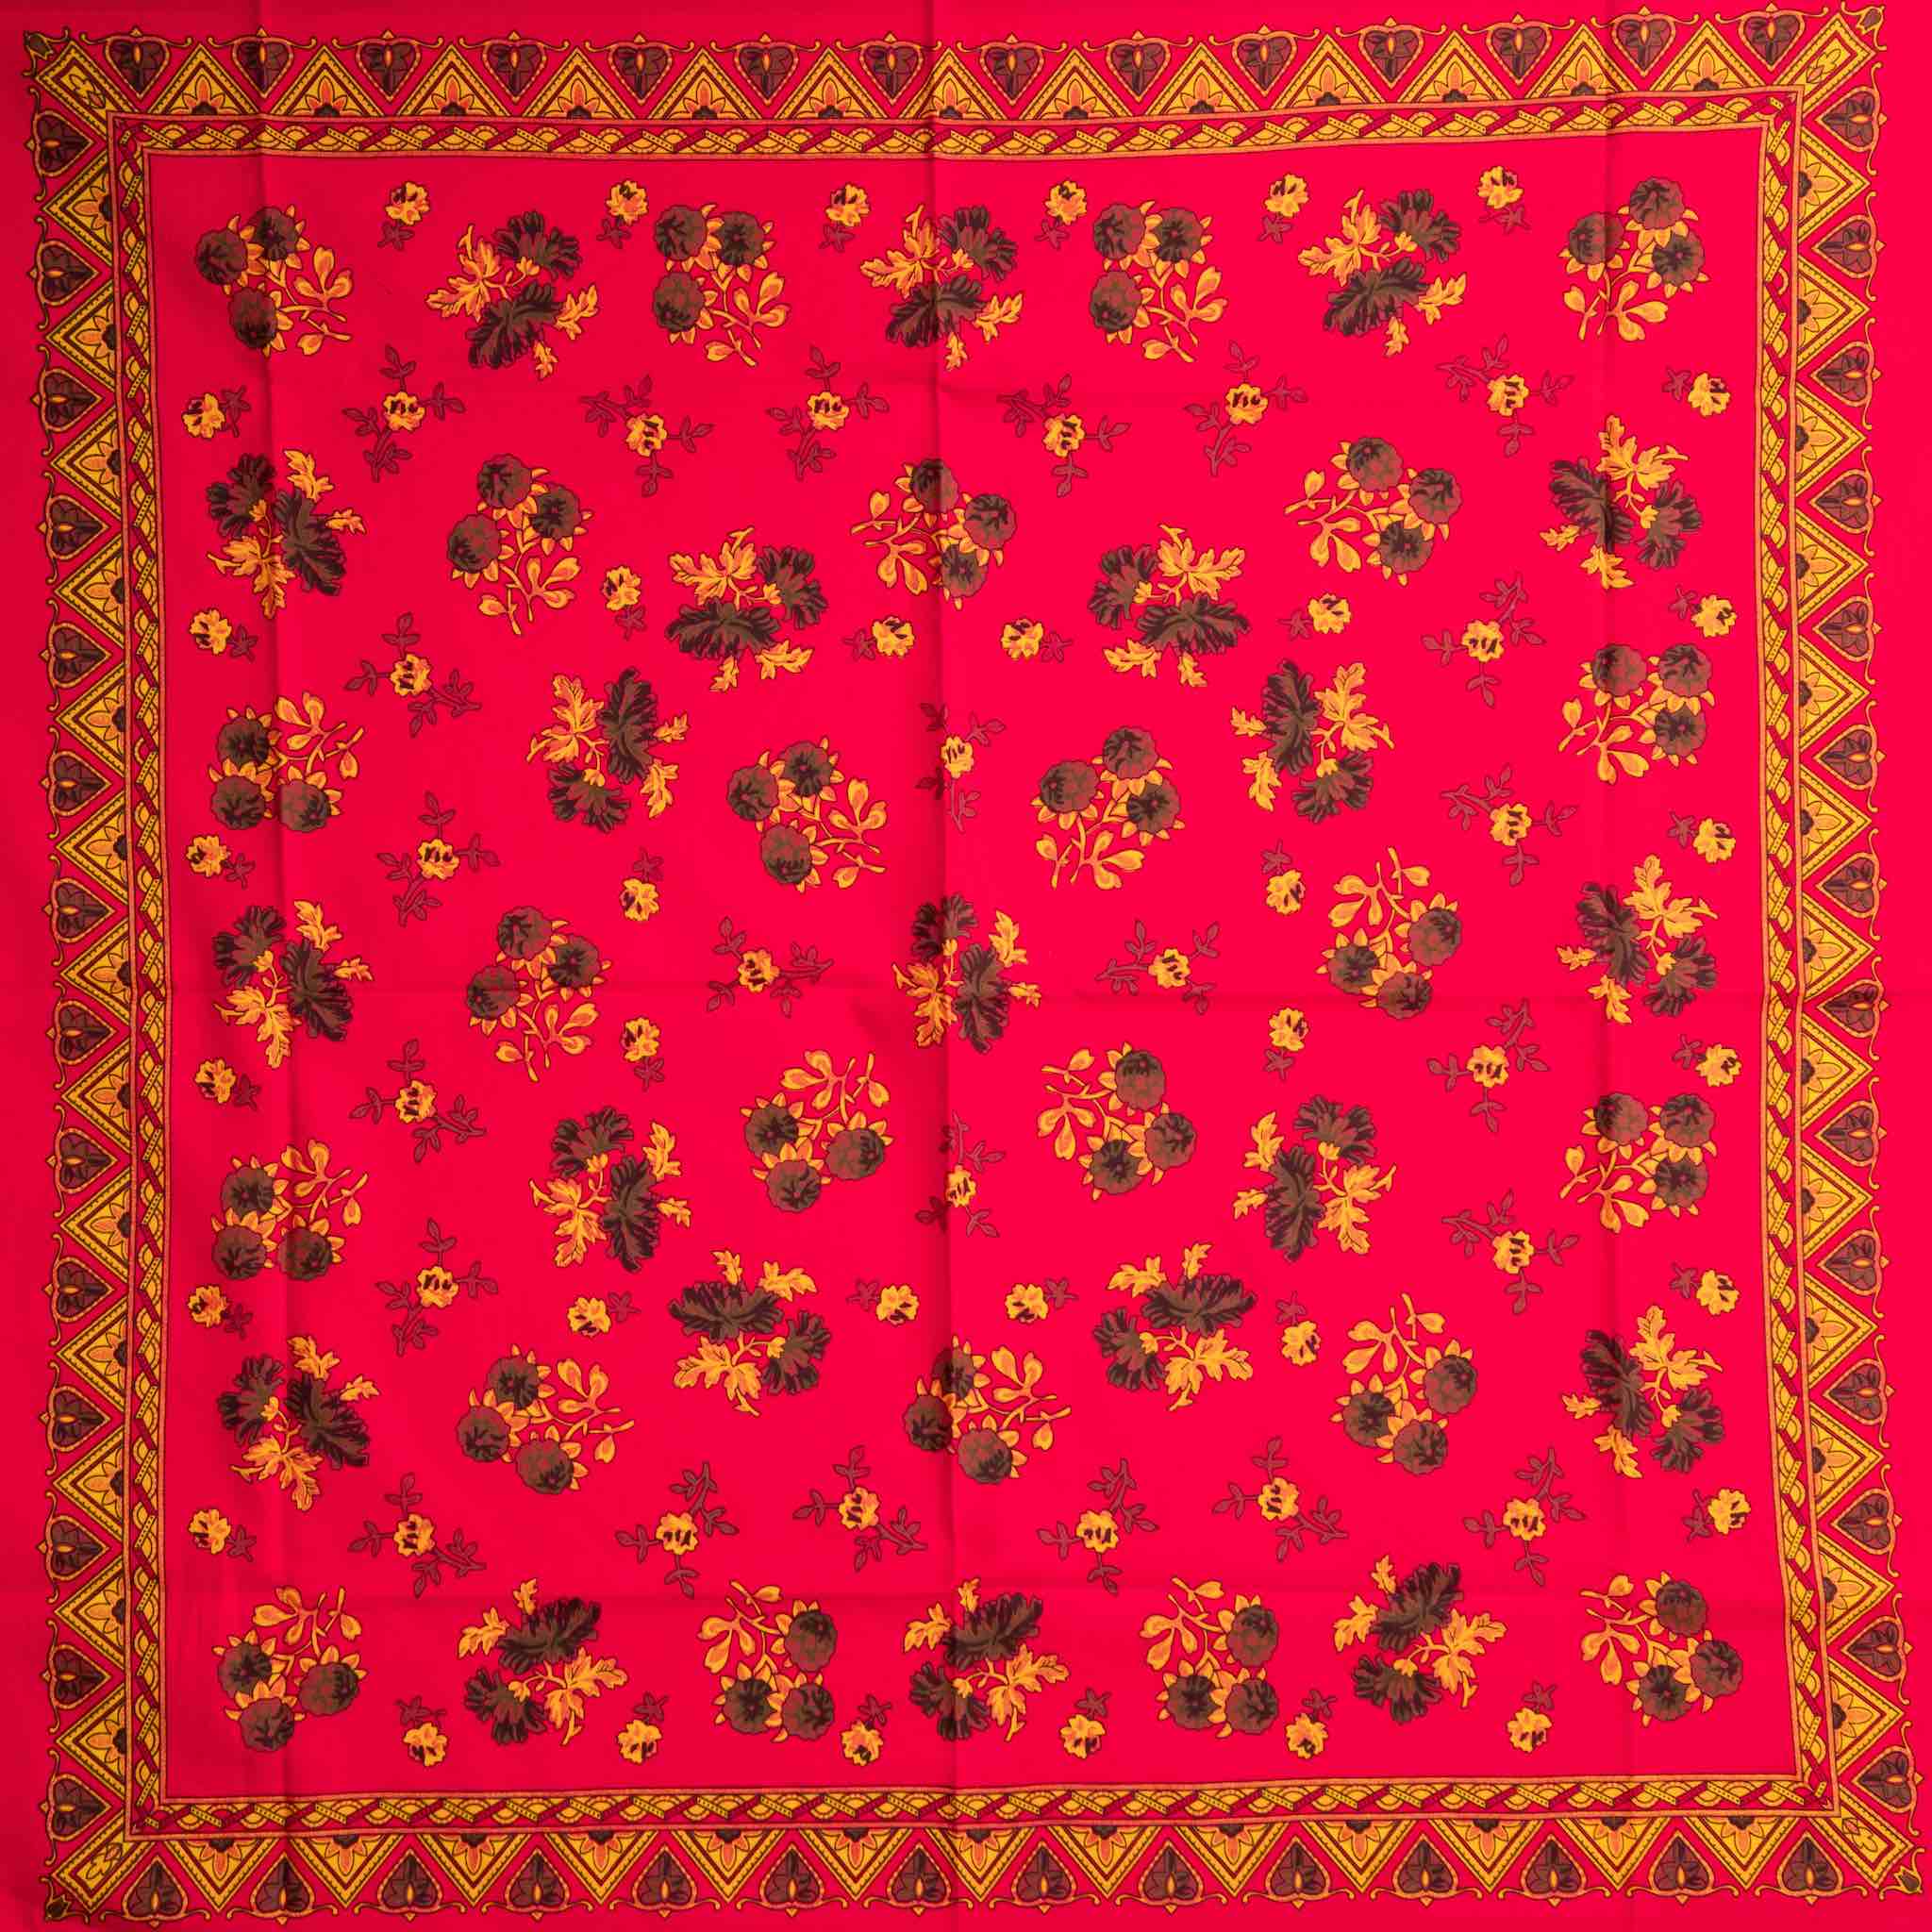 red and yellow made in Portugal fabric for shawls